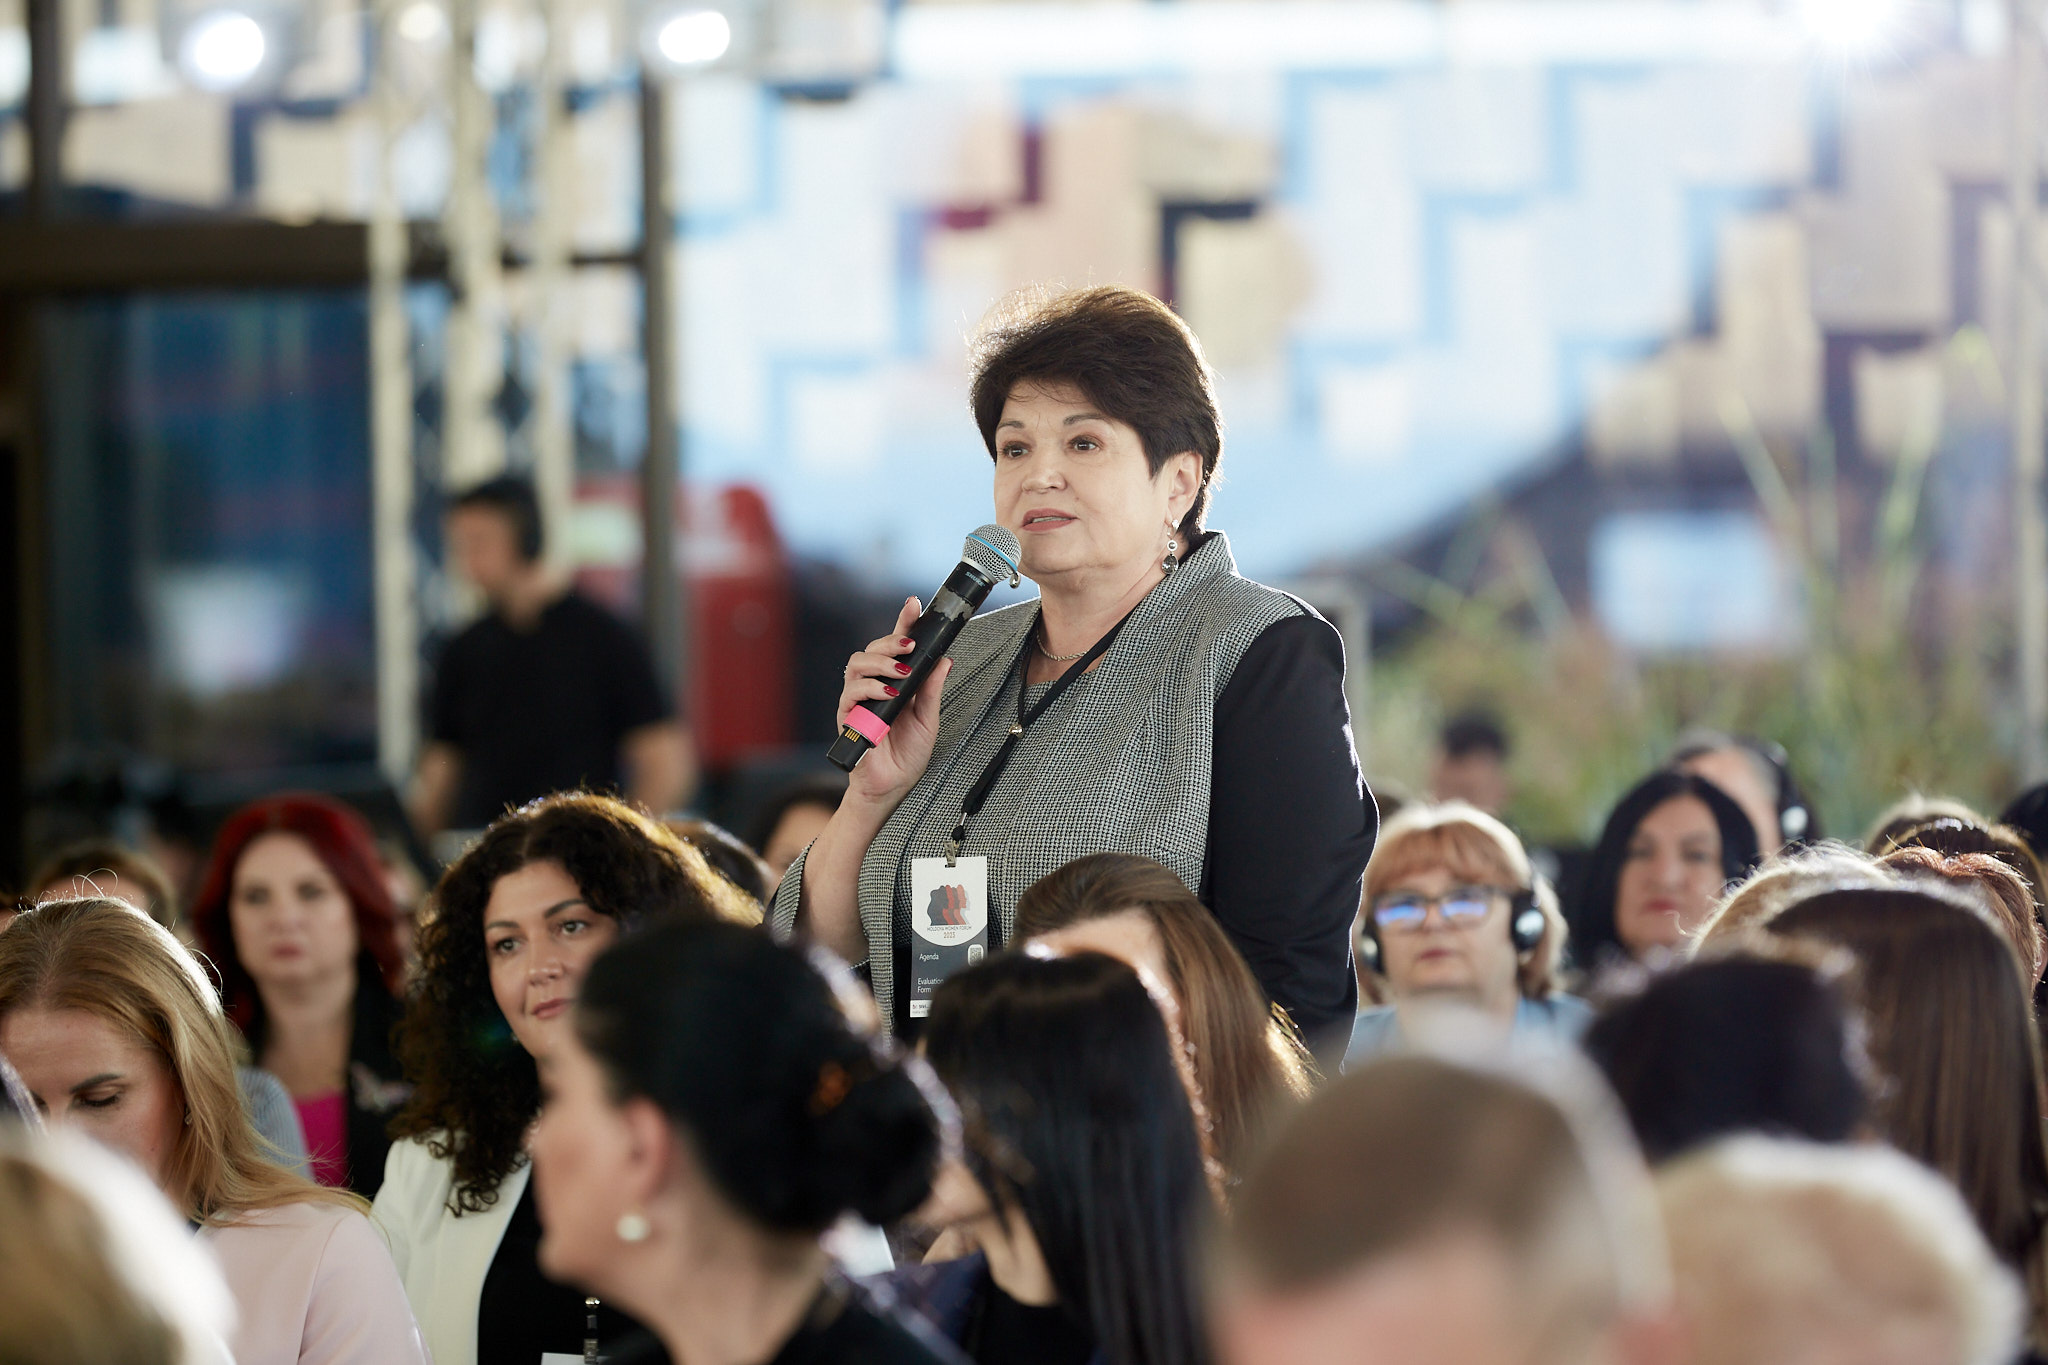 A participant asks a question to panelists at the Moldova Women Forum.